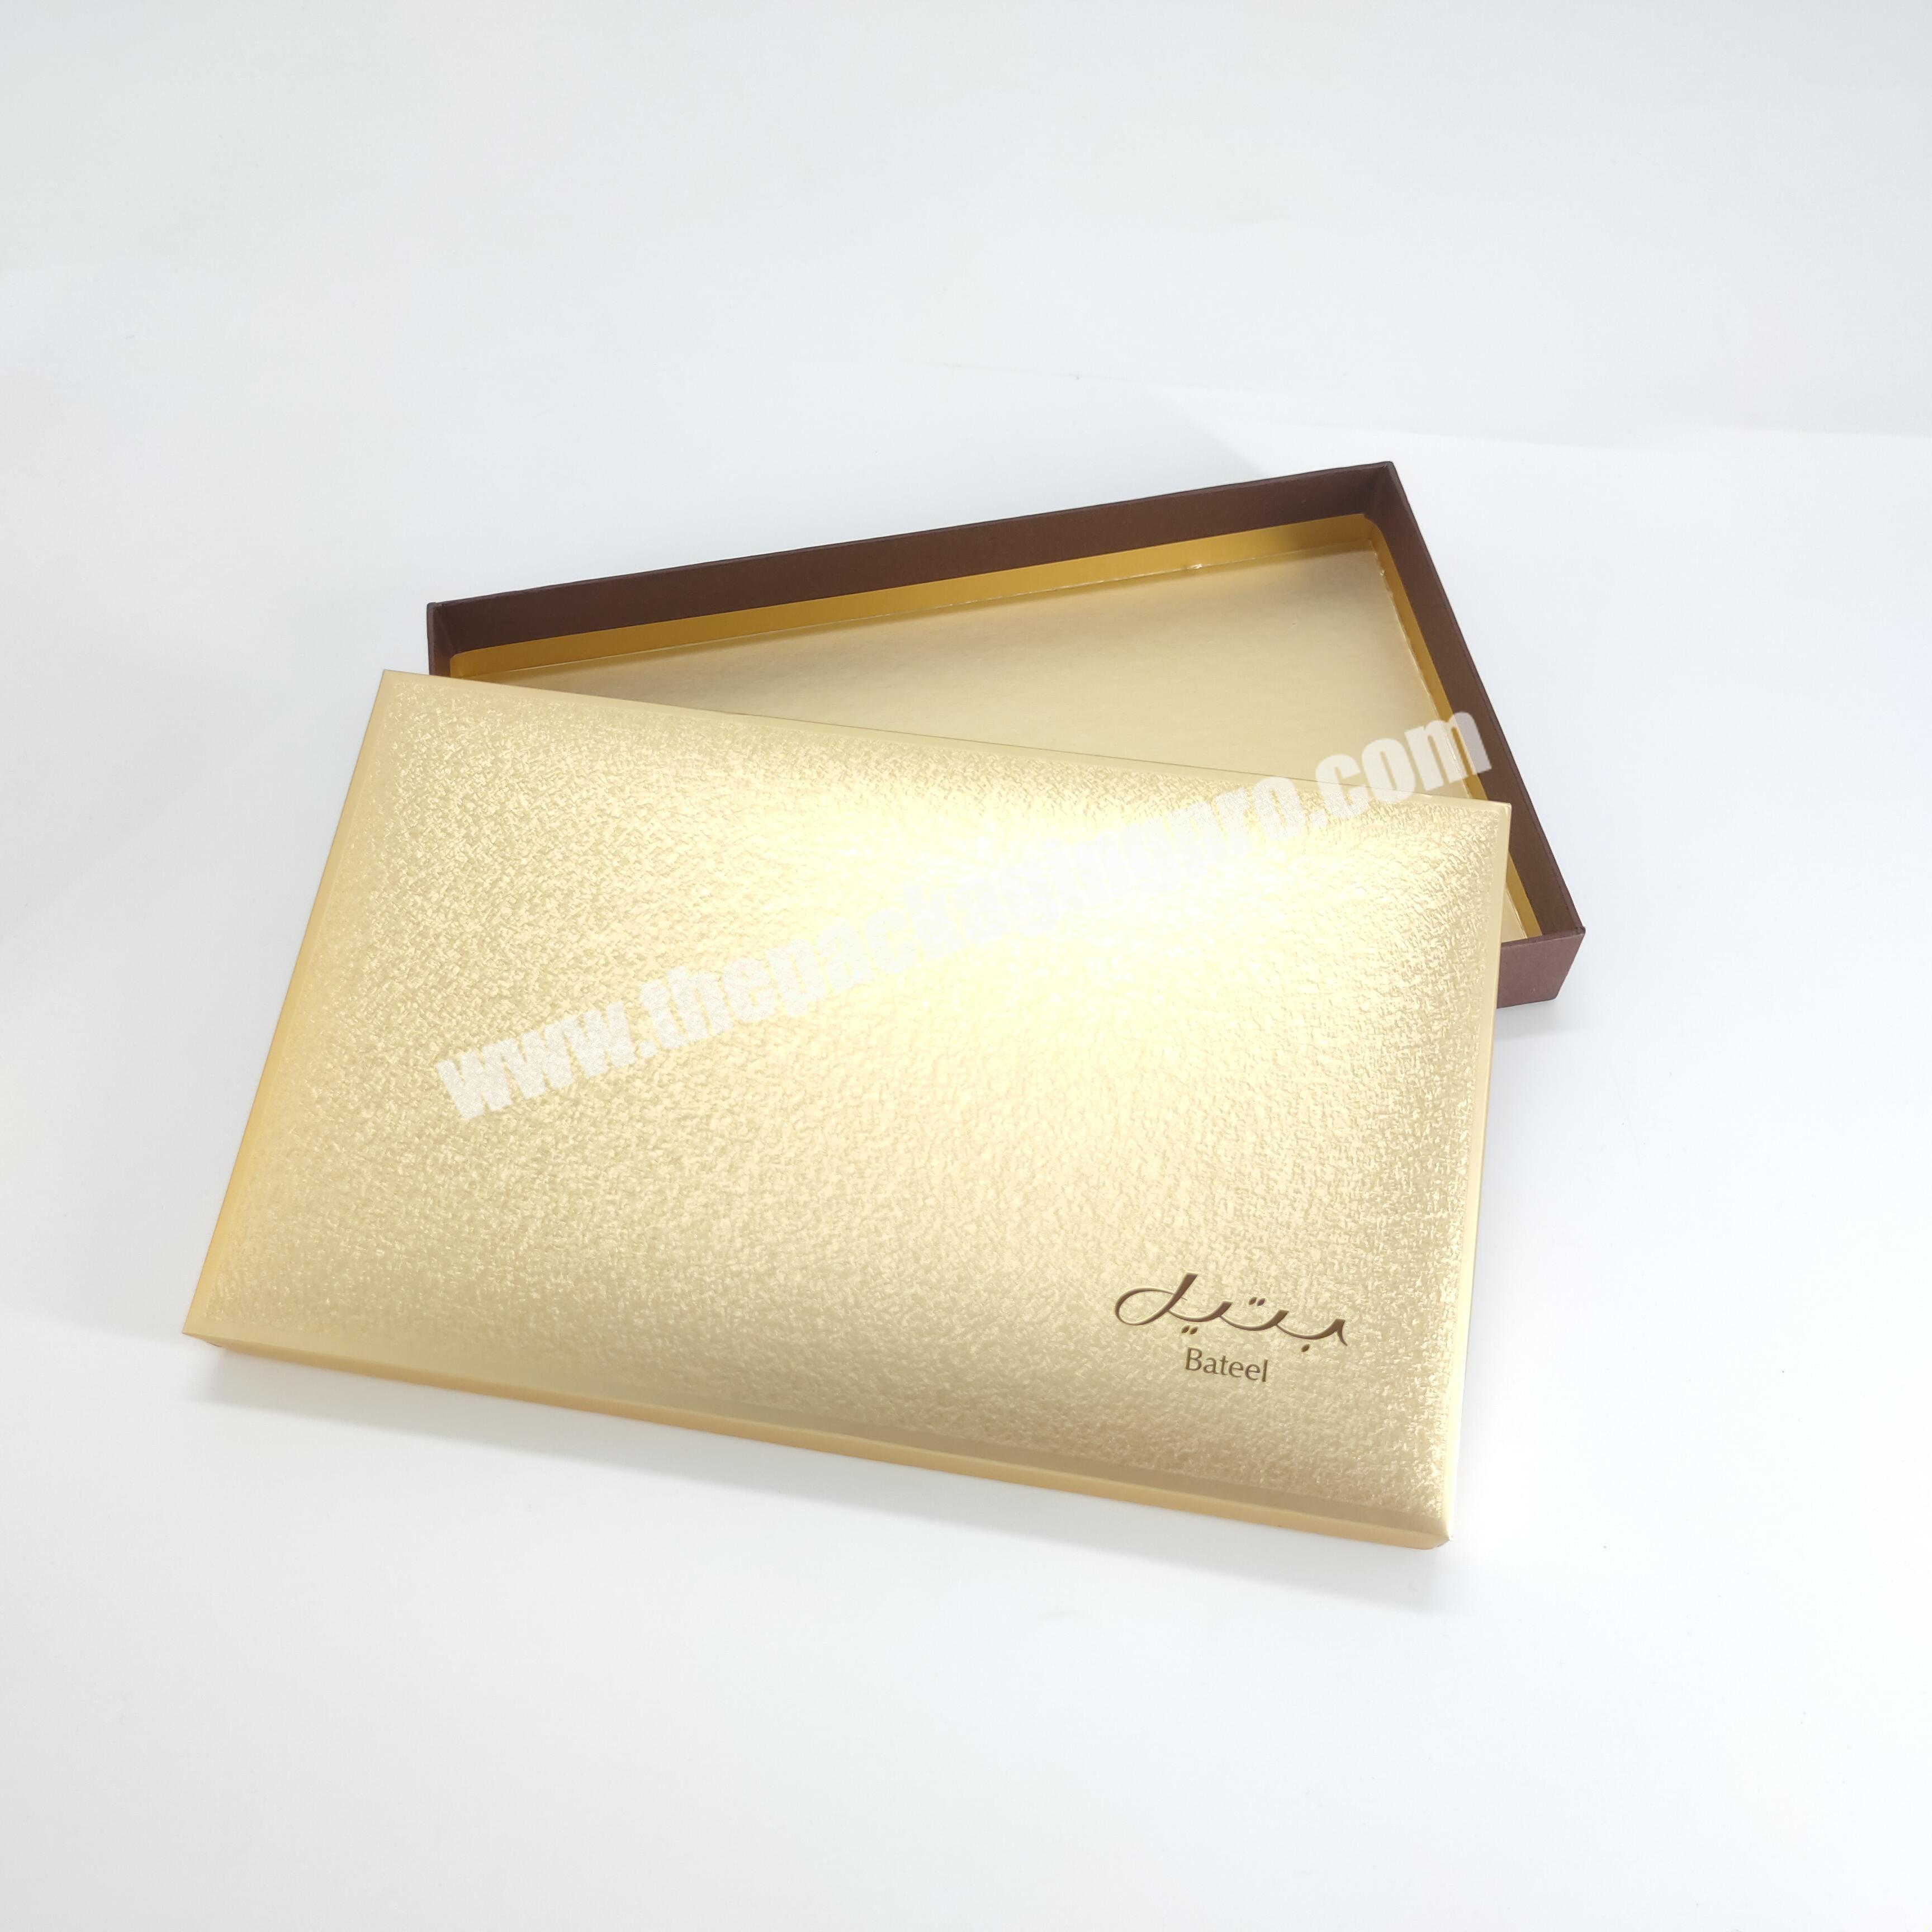 China factory seller packaging boxes custom logo gift with beautiful design